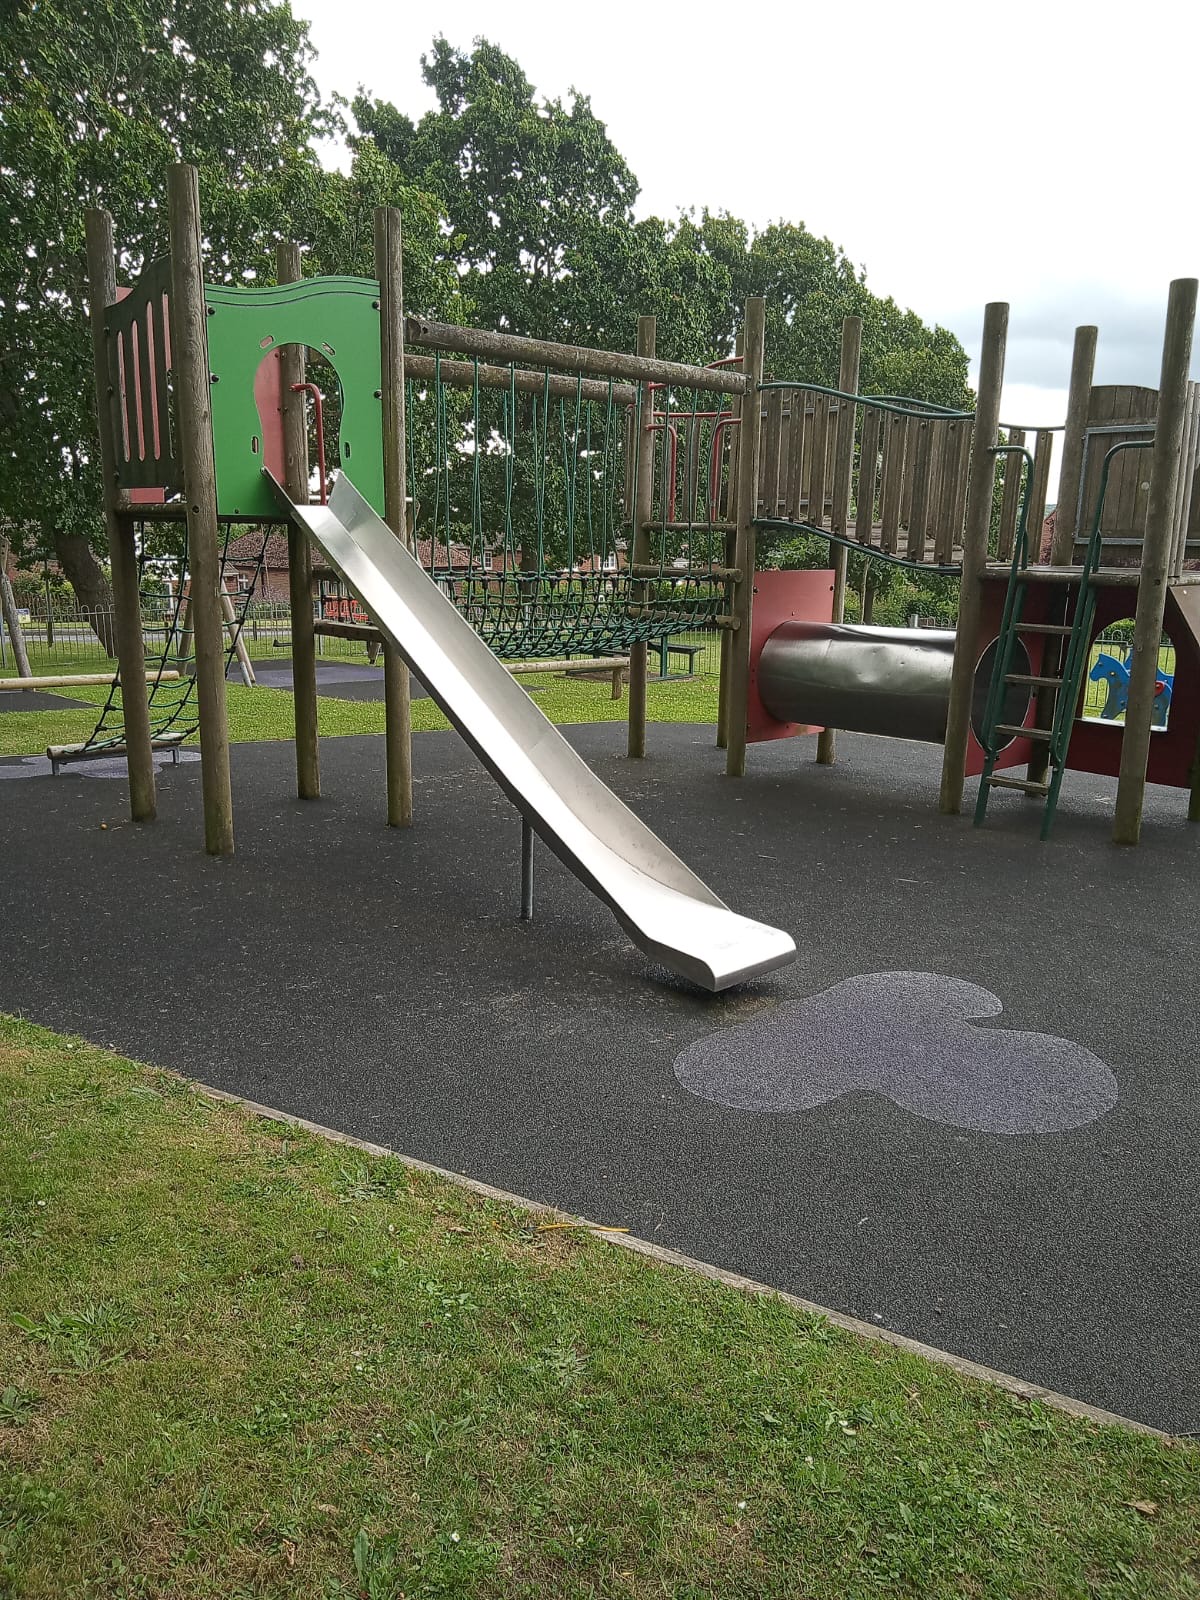 New slide for Old Wives Lees children’s play area